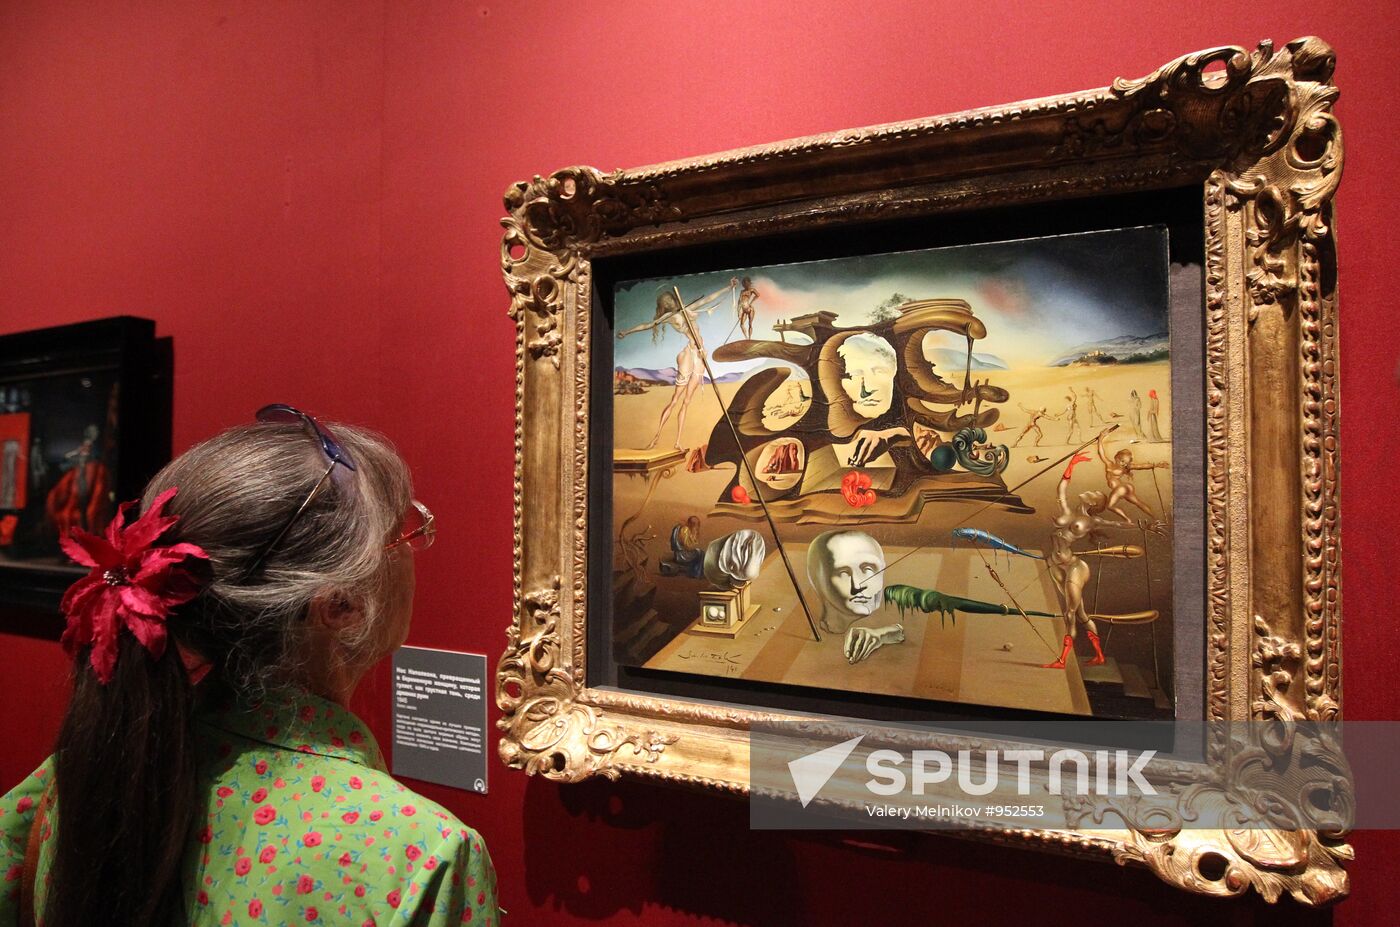 Exhibition of works by Salvador Dali opens at Pushkin Museum